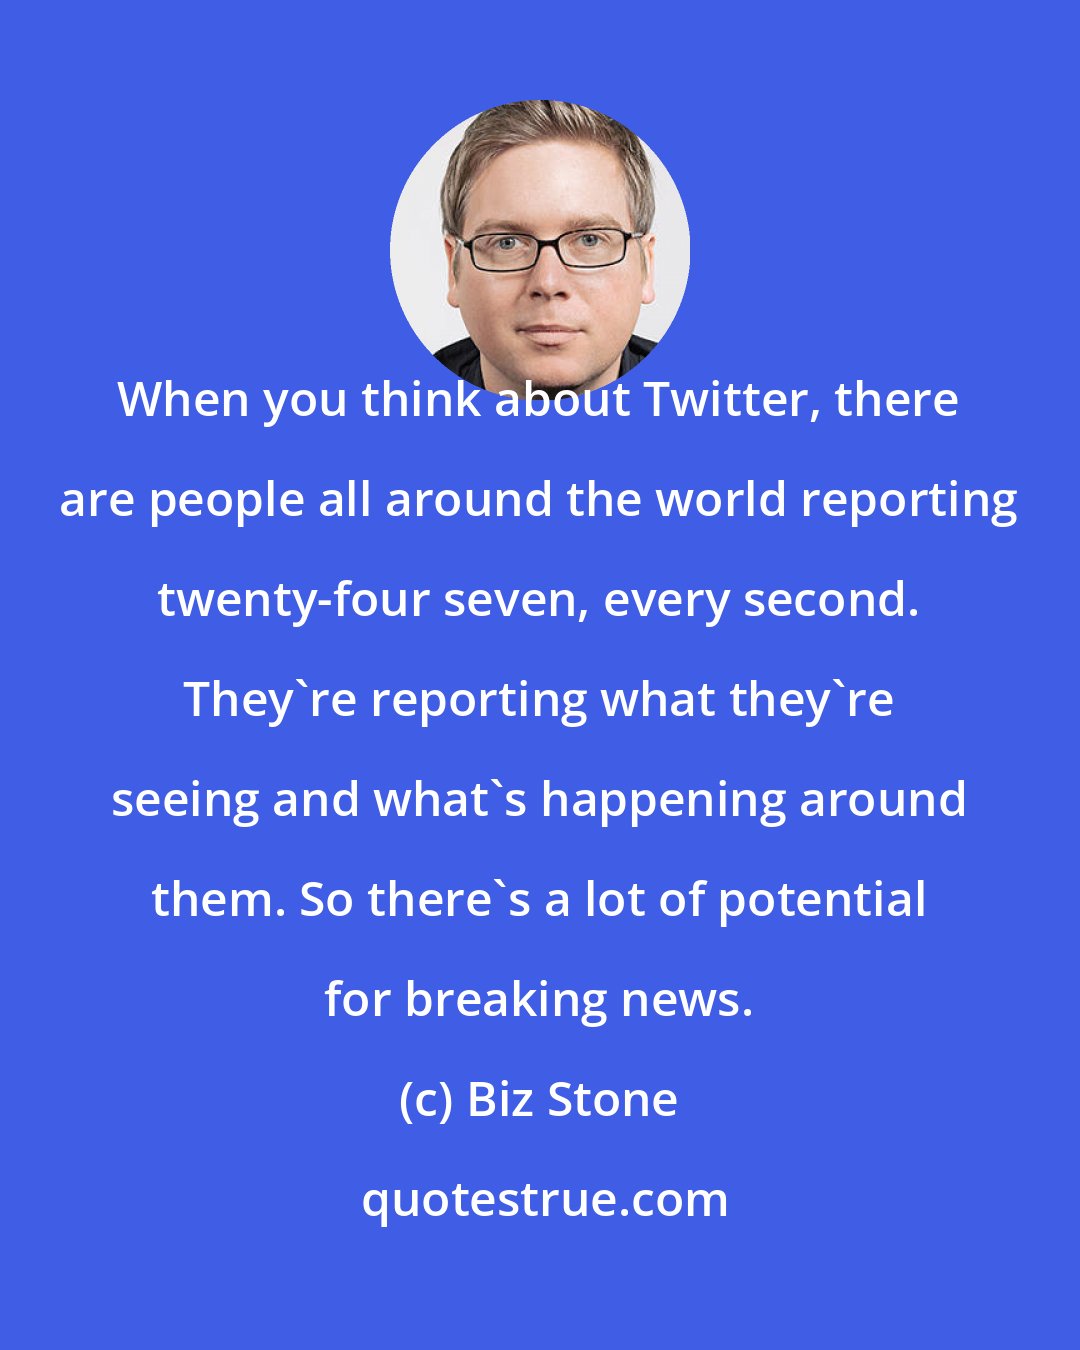 Biz Stone: When you think about Twitter, there are people all around the world reporting twenty-four seven, every second. They're reporting what they're seeing and what's happening around them. So there's a lot of potential for breaking news.